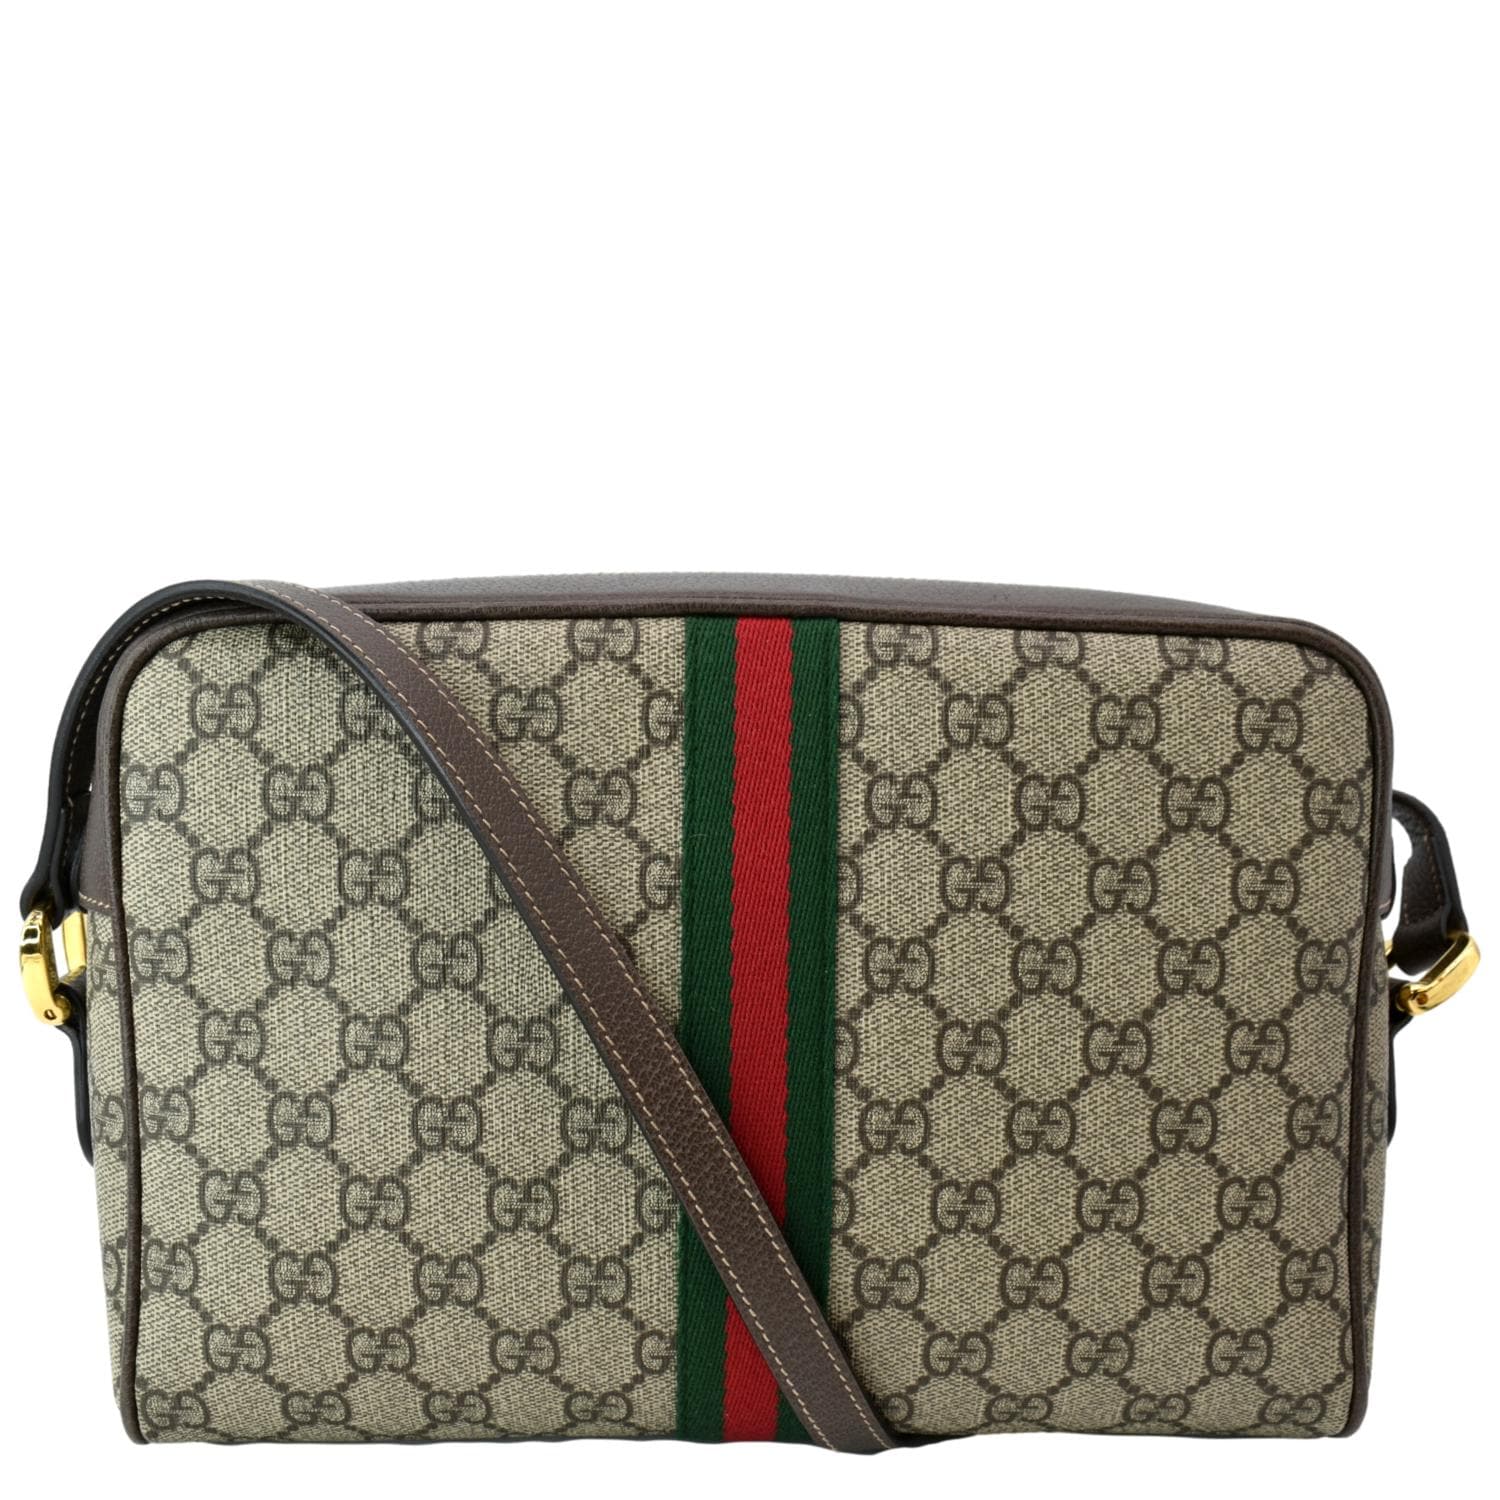 Gucci, Bags, Auth Gucci Ophidia Crossbody Bag